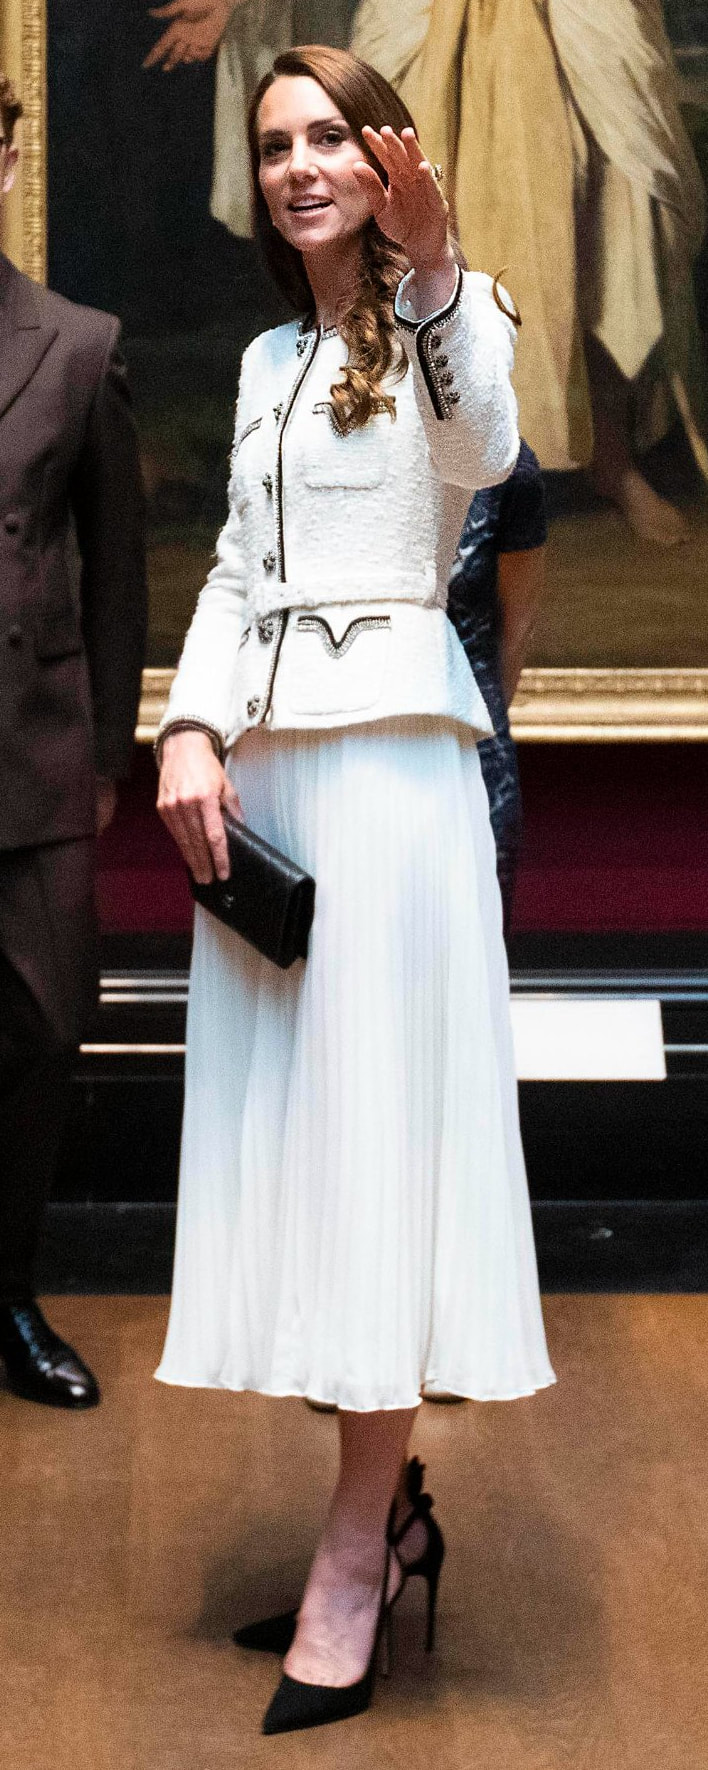 Chanel Classic Wallet in Black Lambskin as carried by Kate Middleton, Princess of Wales.